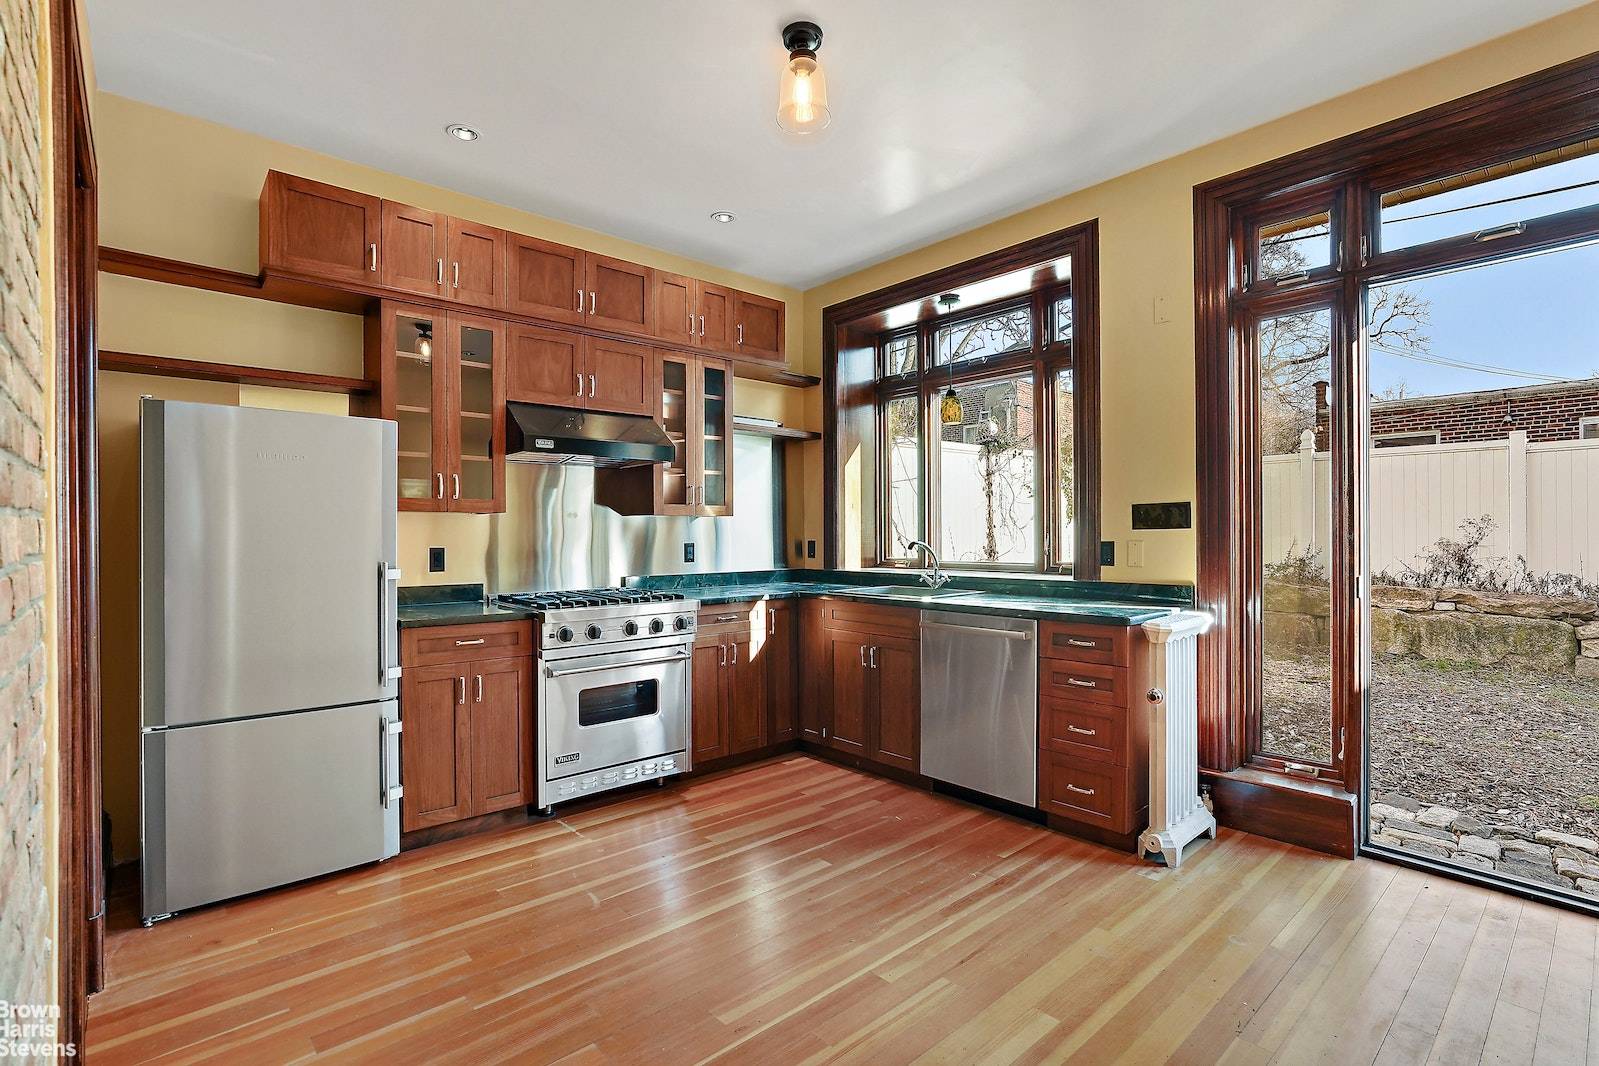 Old World Charm meets modern amenities in this exquisite turnkey Marble Hill Victorian house built in 1895.